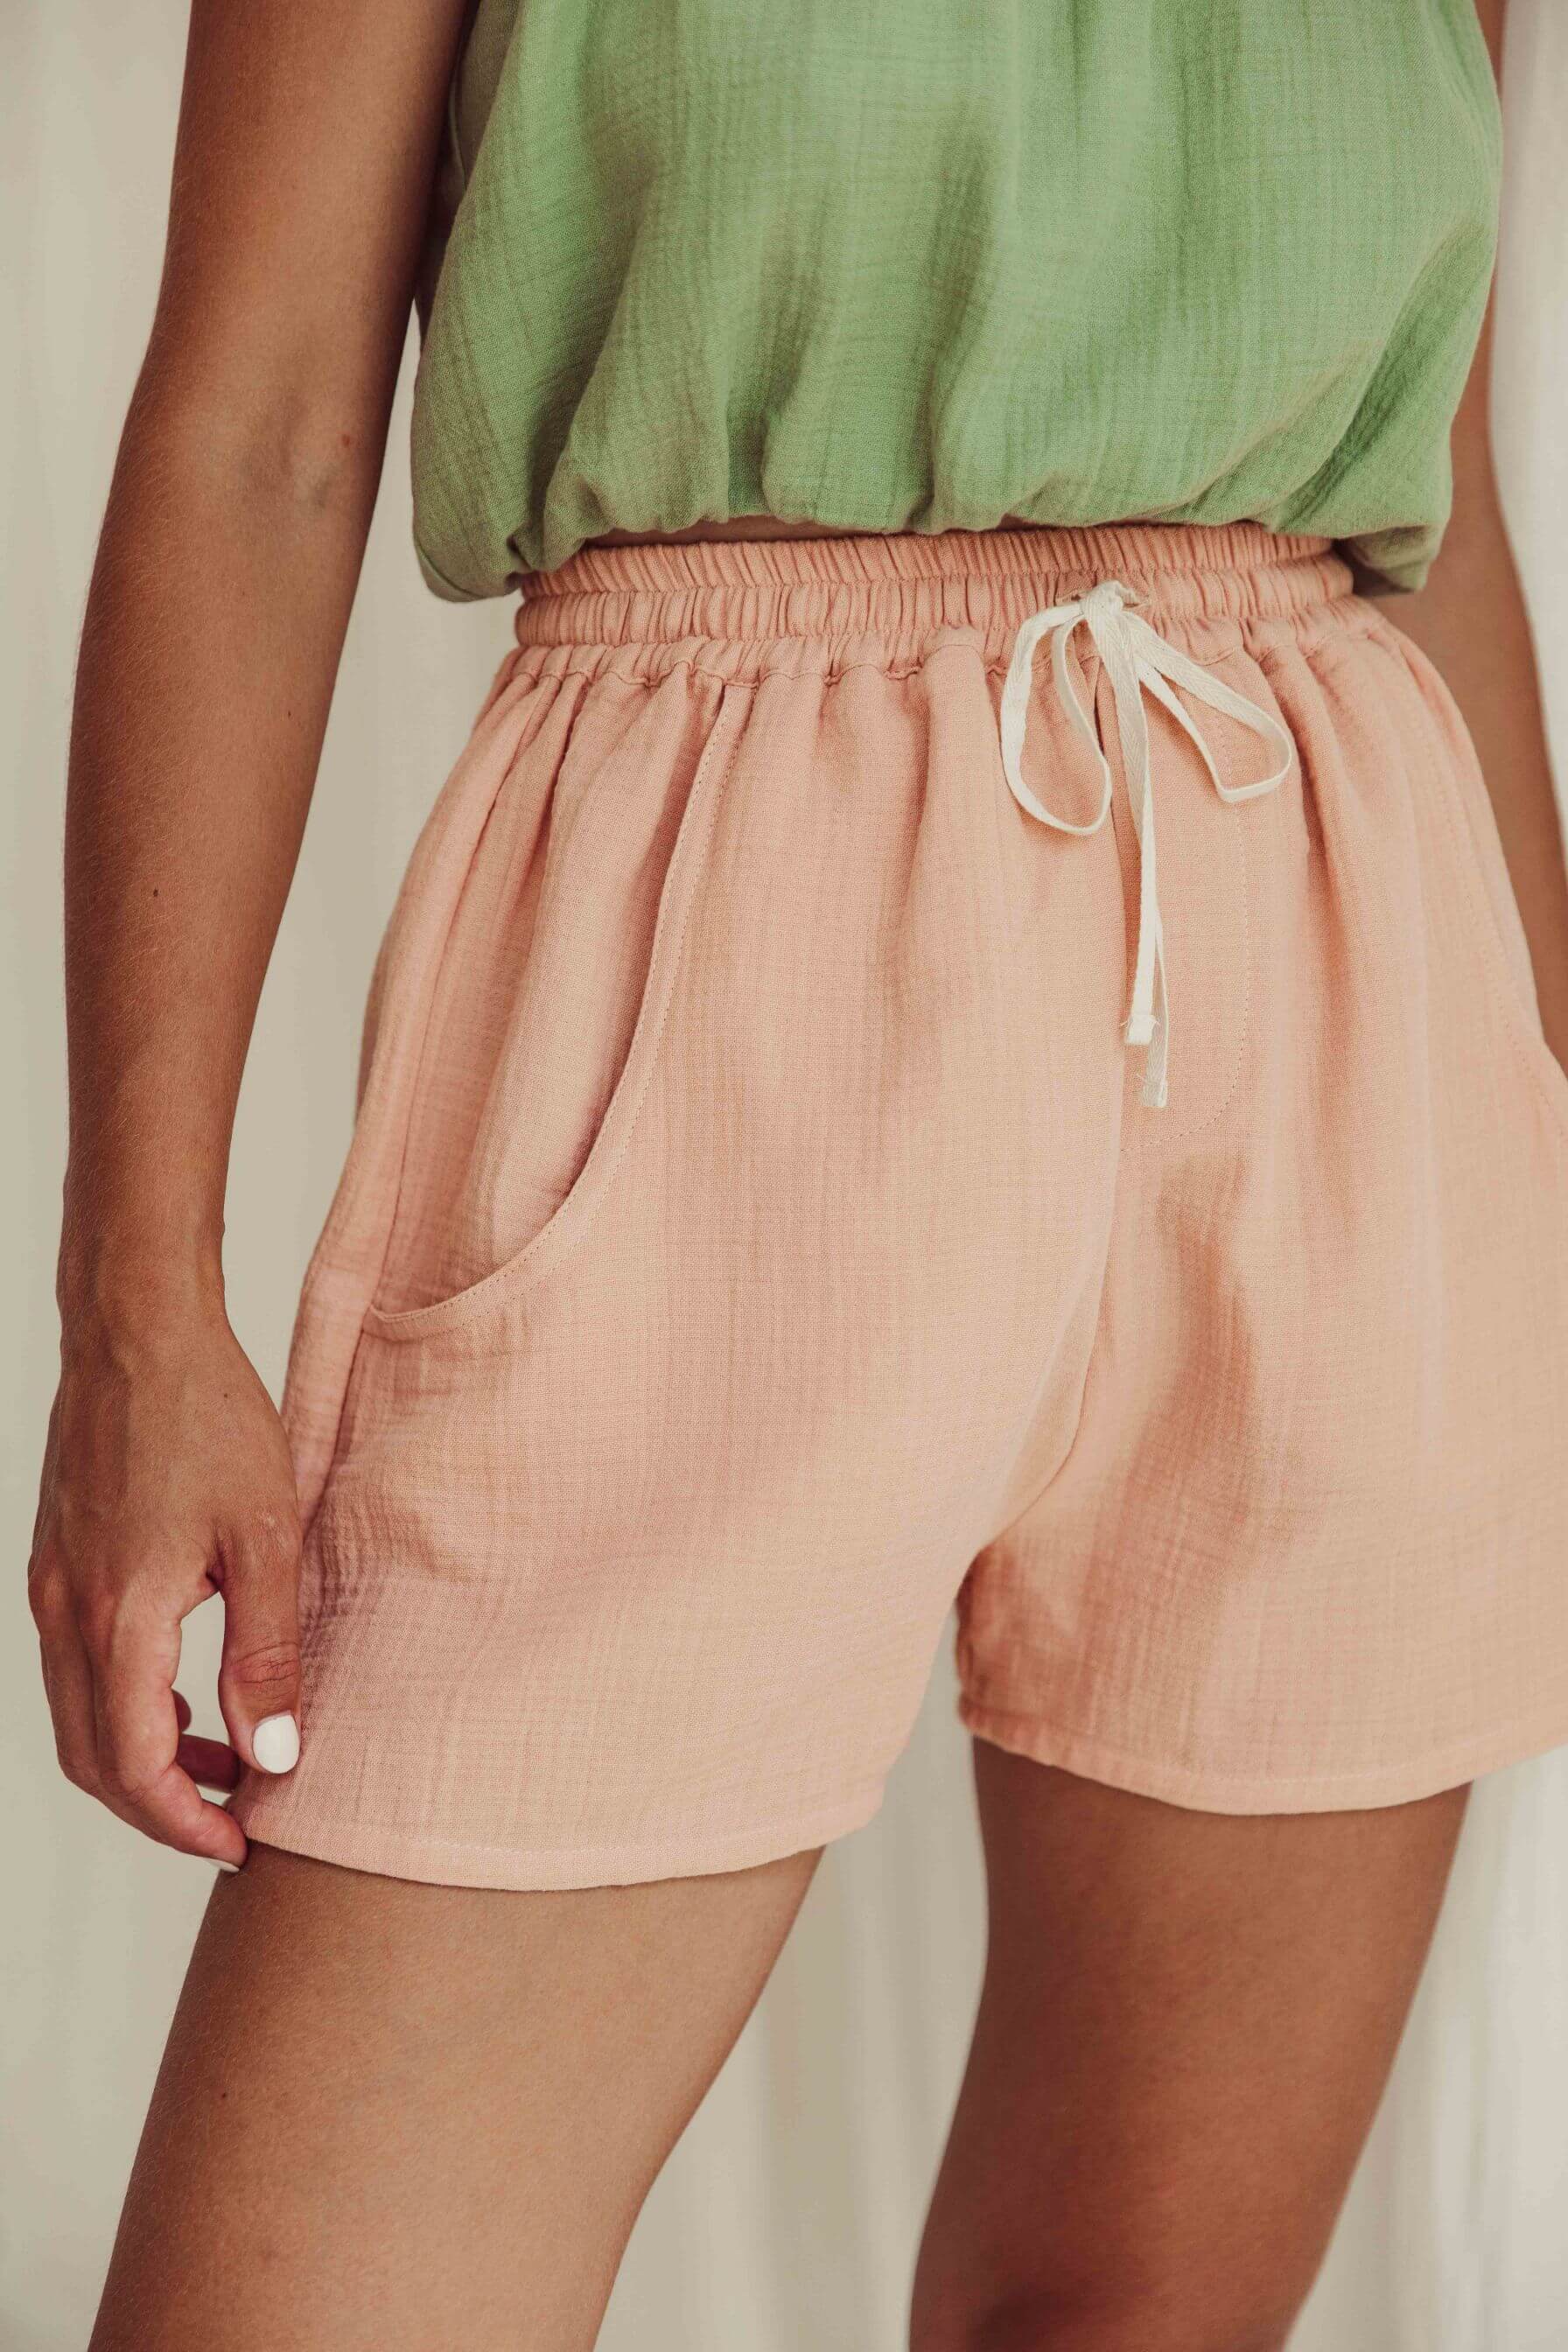 Shop women's summer shorts online in Hong Kong and Singapore. Organic cotton women's shorts in peach colour have 2 pockets and an elastic waist, made by Liilu. MiliMilu offers a wide range of sustainable women's fashion online, women's organic cotton summer clothes and linen dresses with many Mini me styles.